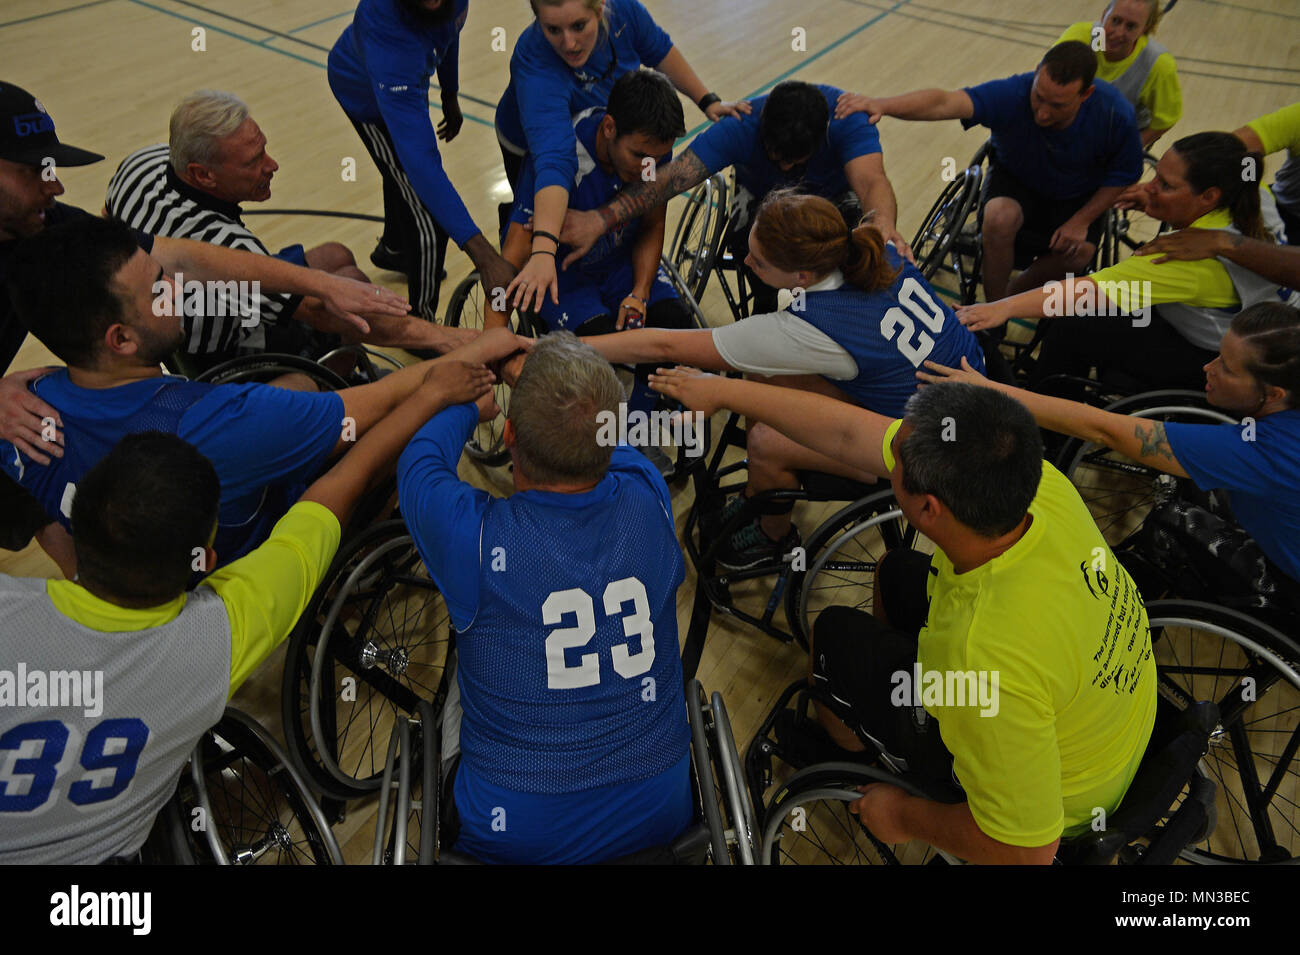 Participants of the Air force Wounded Warrior Program, play wheelchair basketball during the 2017 Joint Adaptive Sports Camp Aug. 29, 2017, at Joint Base Lewis-McChord, Wash. During Aug. 28-31, JBLM supported the 2017 JASC management team as they hosted a joint services camp at Cowan and Memorial Stadiums, and at other athletic venues across the installation. Cowan Stadium and Memorial Field was setup for all track and field events. The Directorate of Family and Morale, Welfare and Recreation tent was used for archery and shooting events, and Soldier’s Field House was used for swimming events. Stock Photo